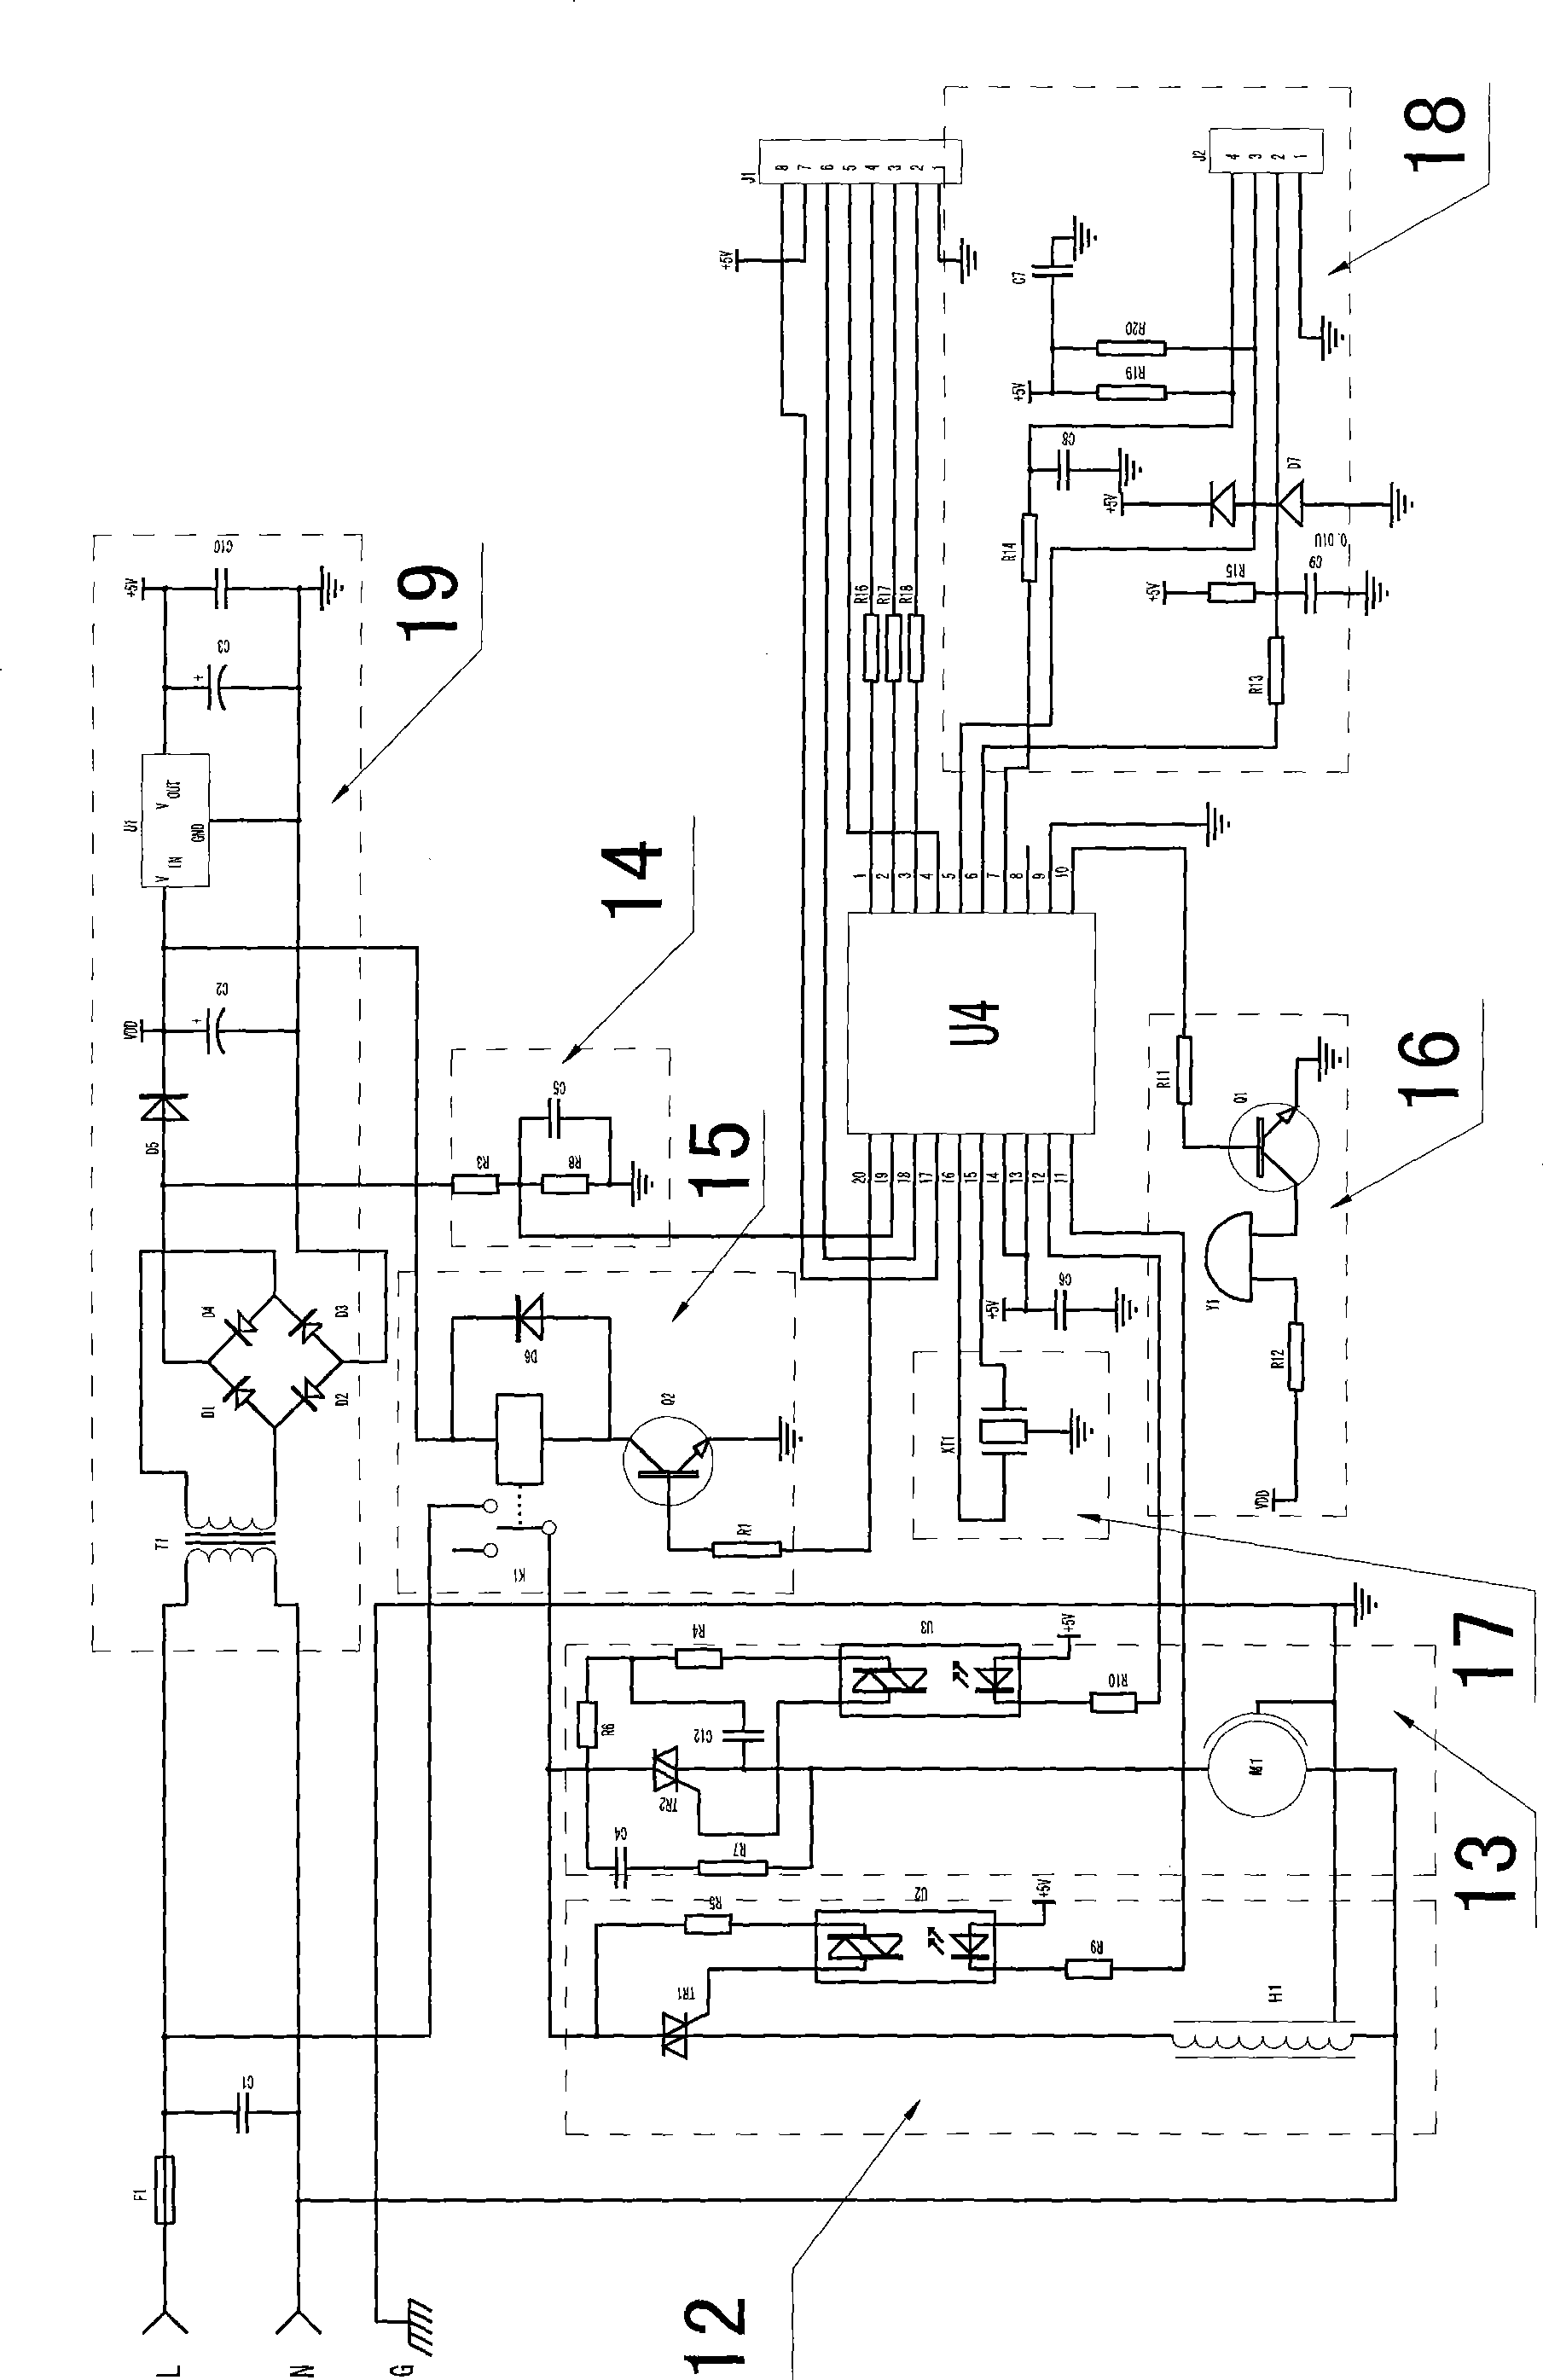 Method for producing soya-bean milk and rice paste using full automatic soybean milk machine